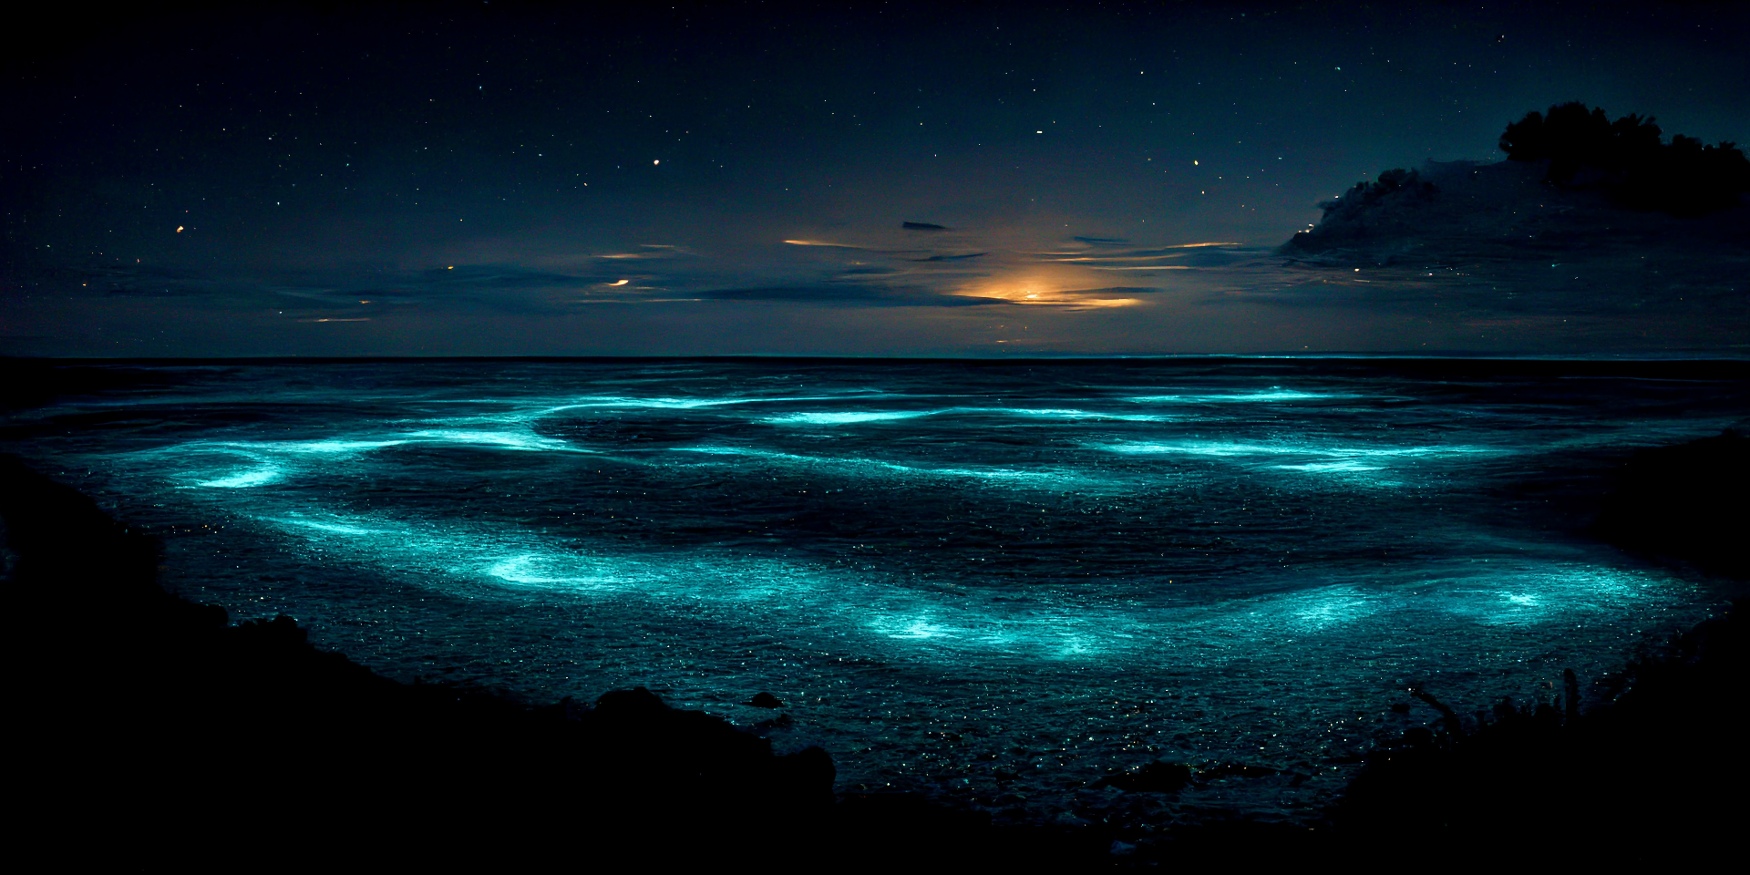 Hạ Long Bay in Vietnam a best bioluminescent beaches in the world